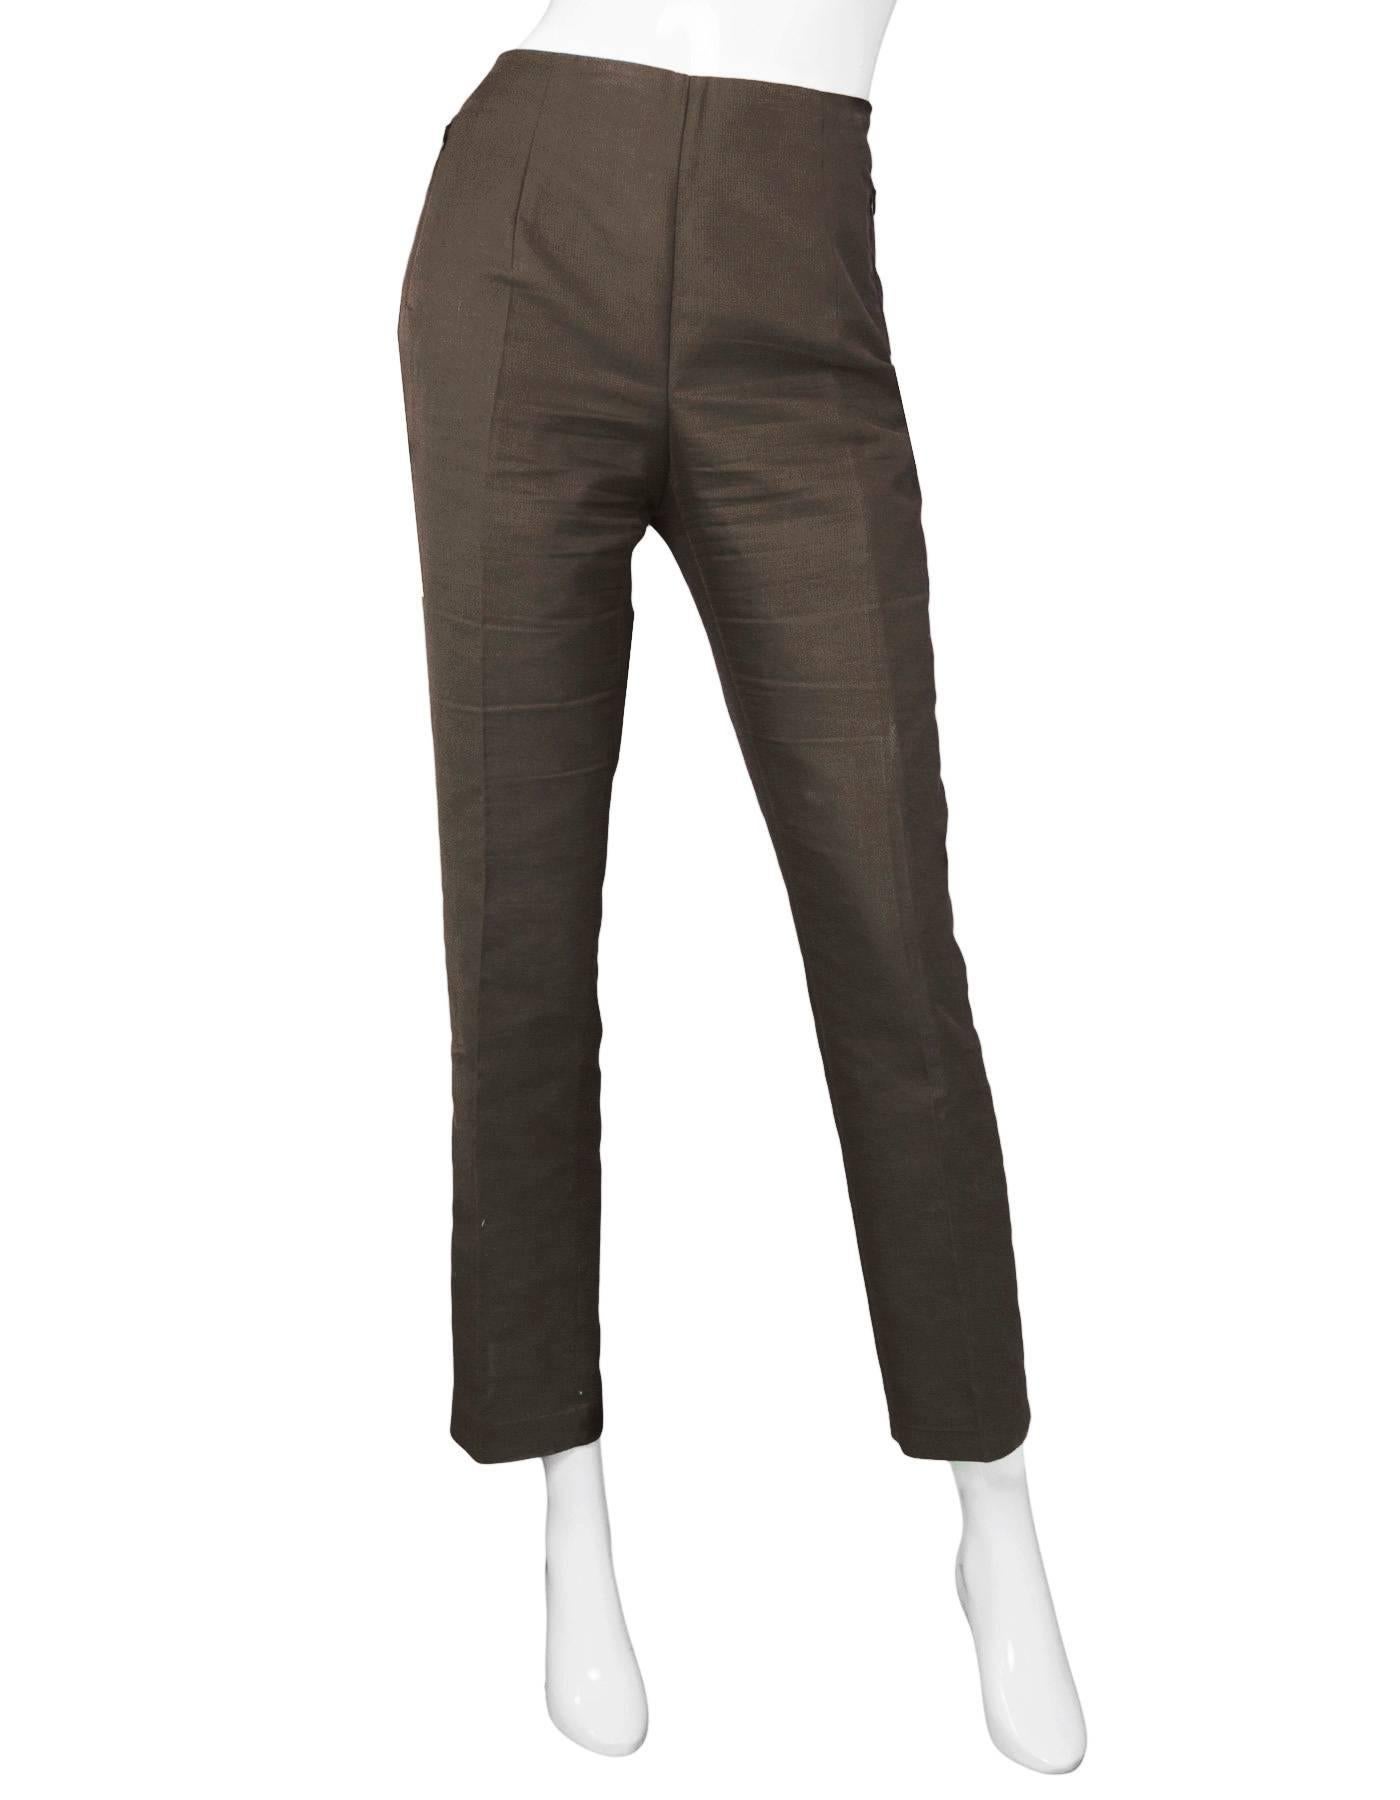 Akris Brown Cropped Pants Sz 8

Made In: Romania
Color: Brown
Composition: 59% cotton, 39% silk, 2% nylon
Lining: None
Closure/Opening: Hidden side zip and button closure
Exterior Pockets: Zip pockets at hips
Overall Condition: Excellent pre-owned